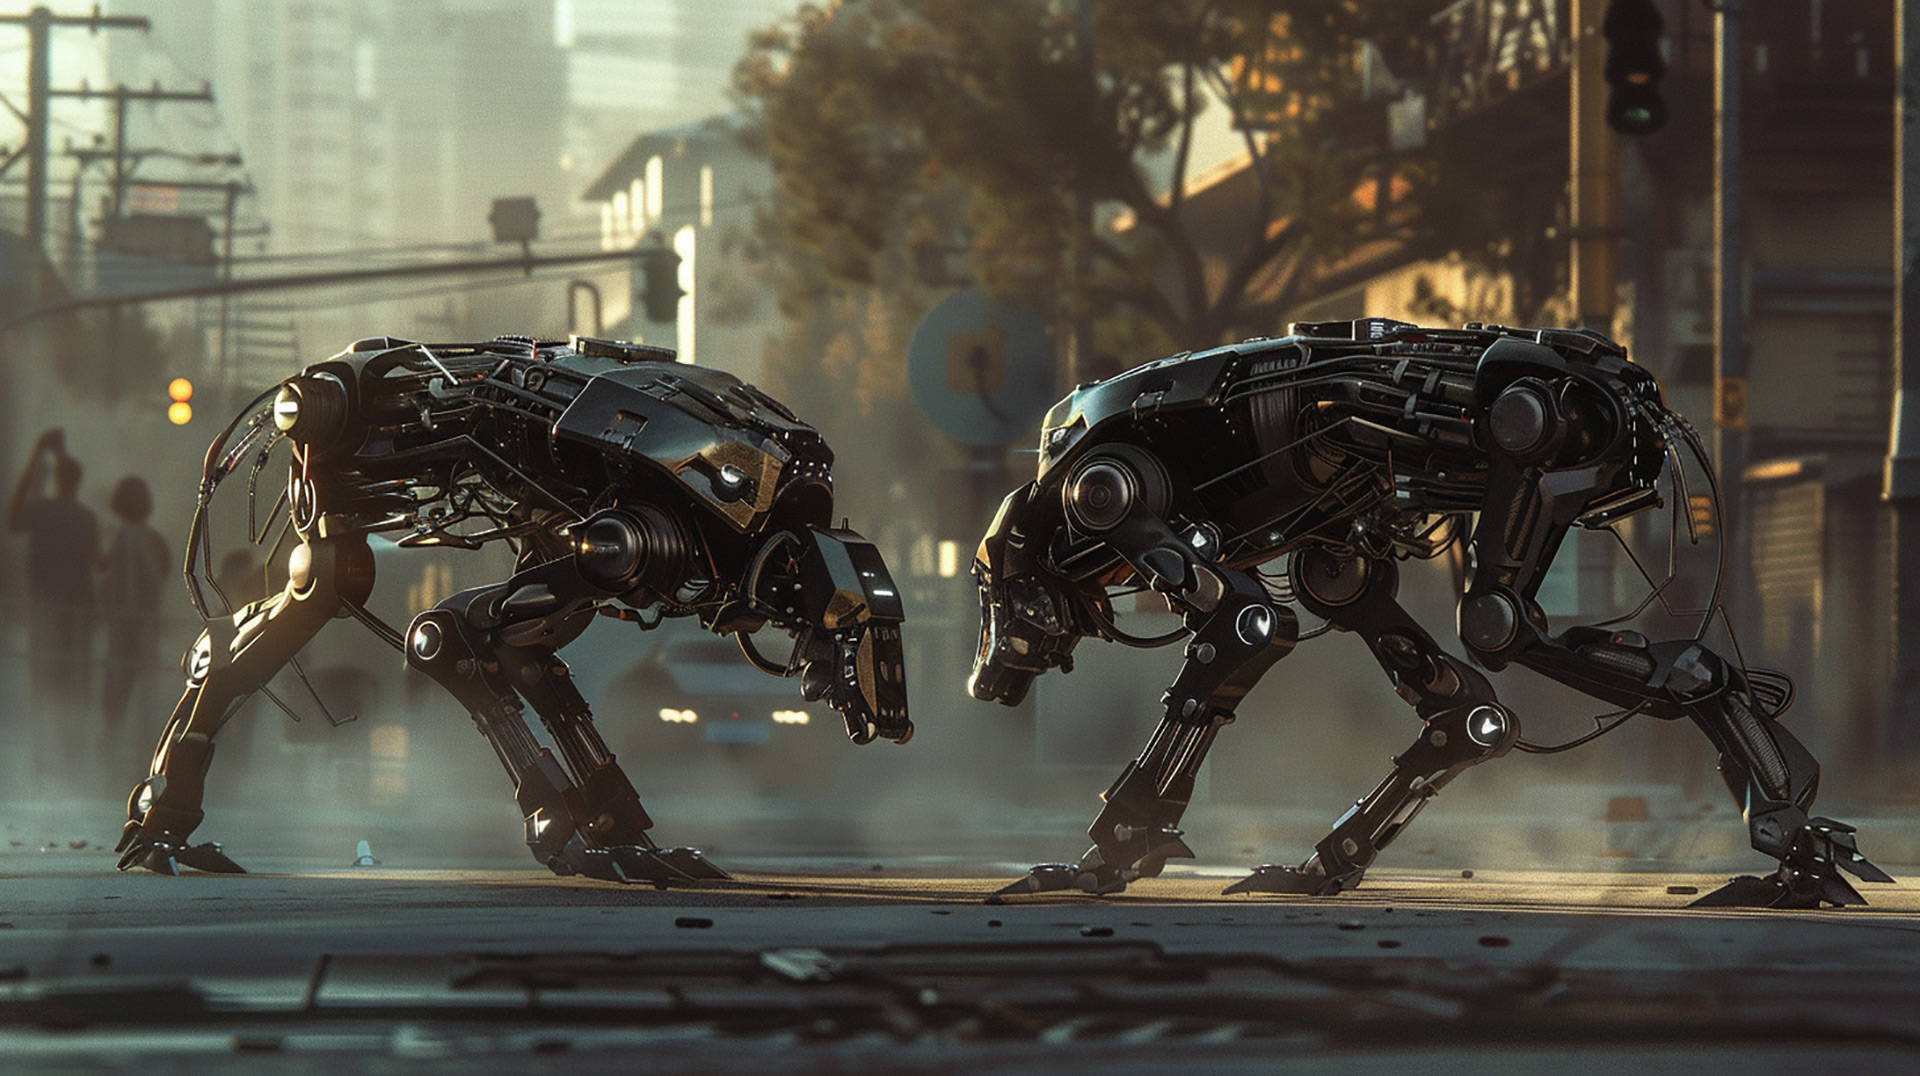 Mechanical Marvels: Robotic Dog Wallpapers in Ultra HD